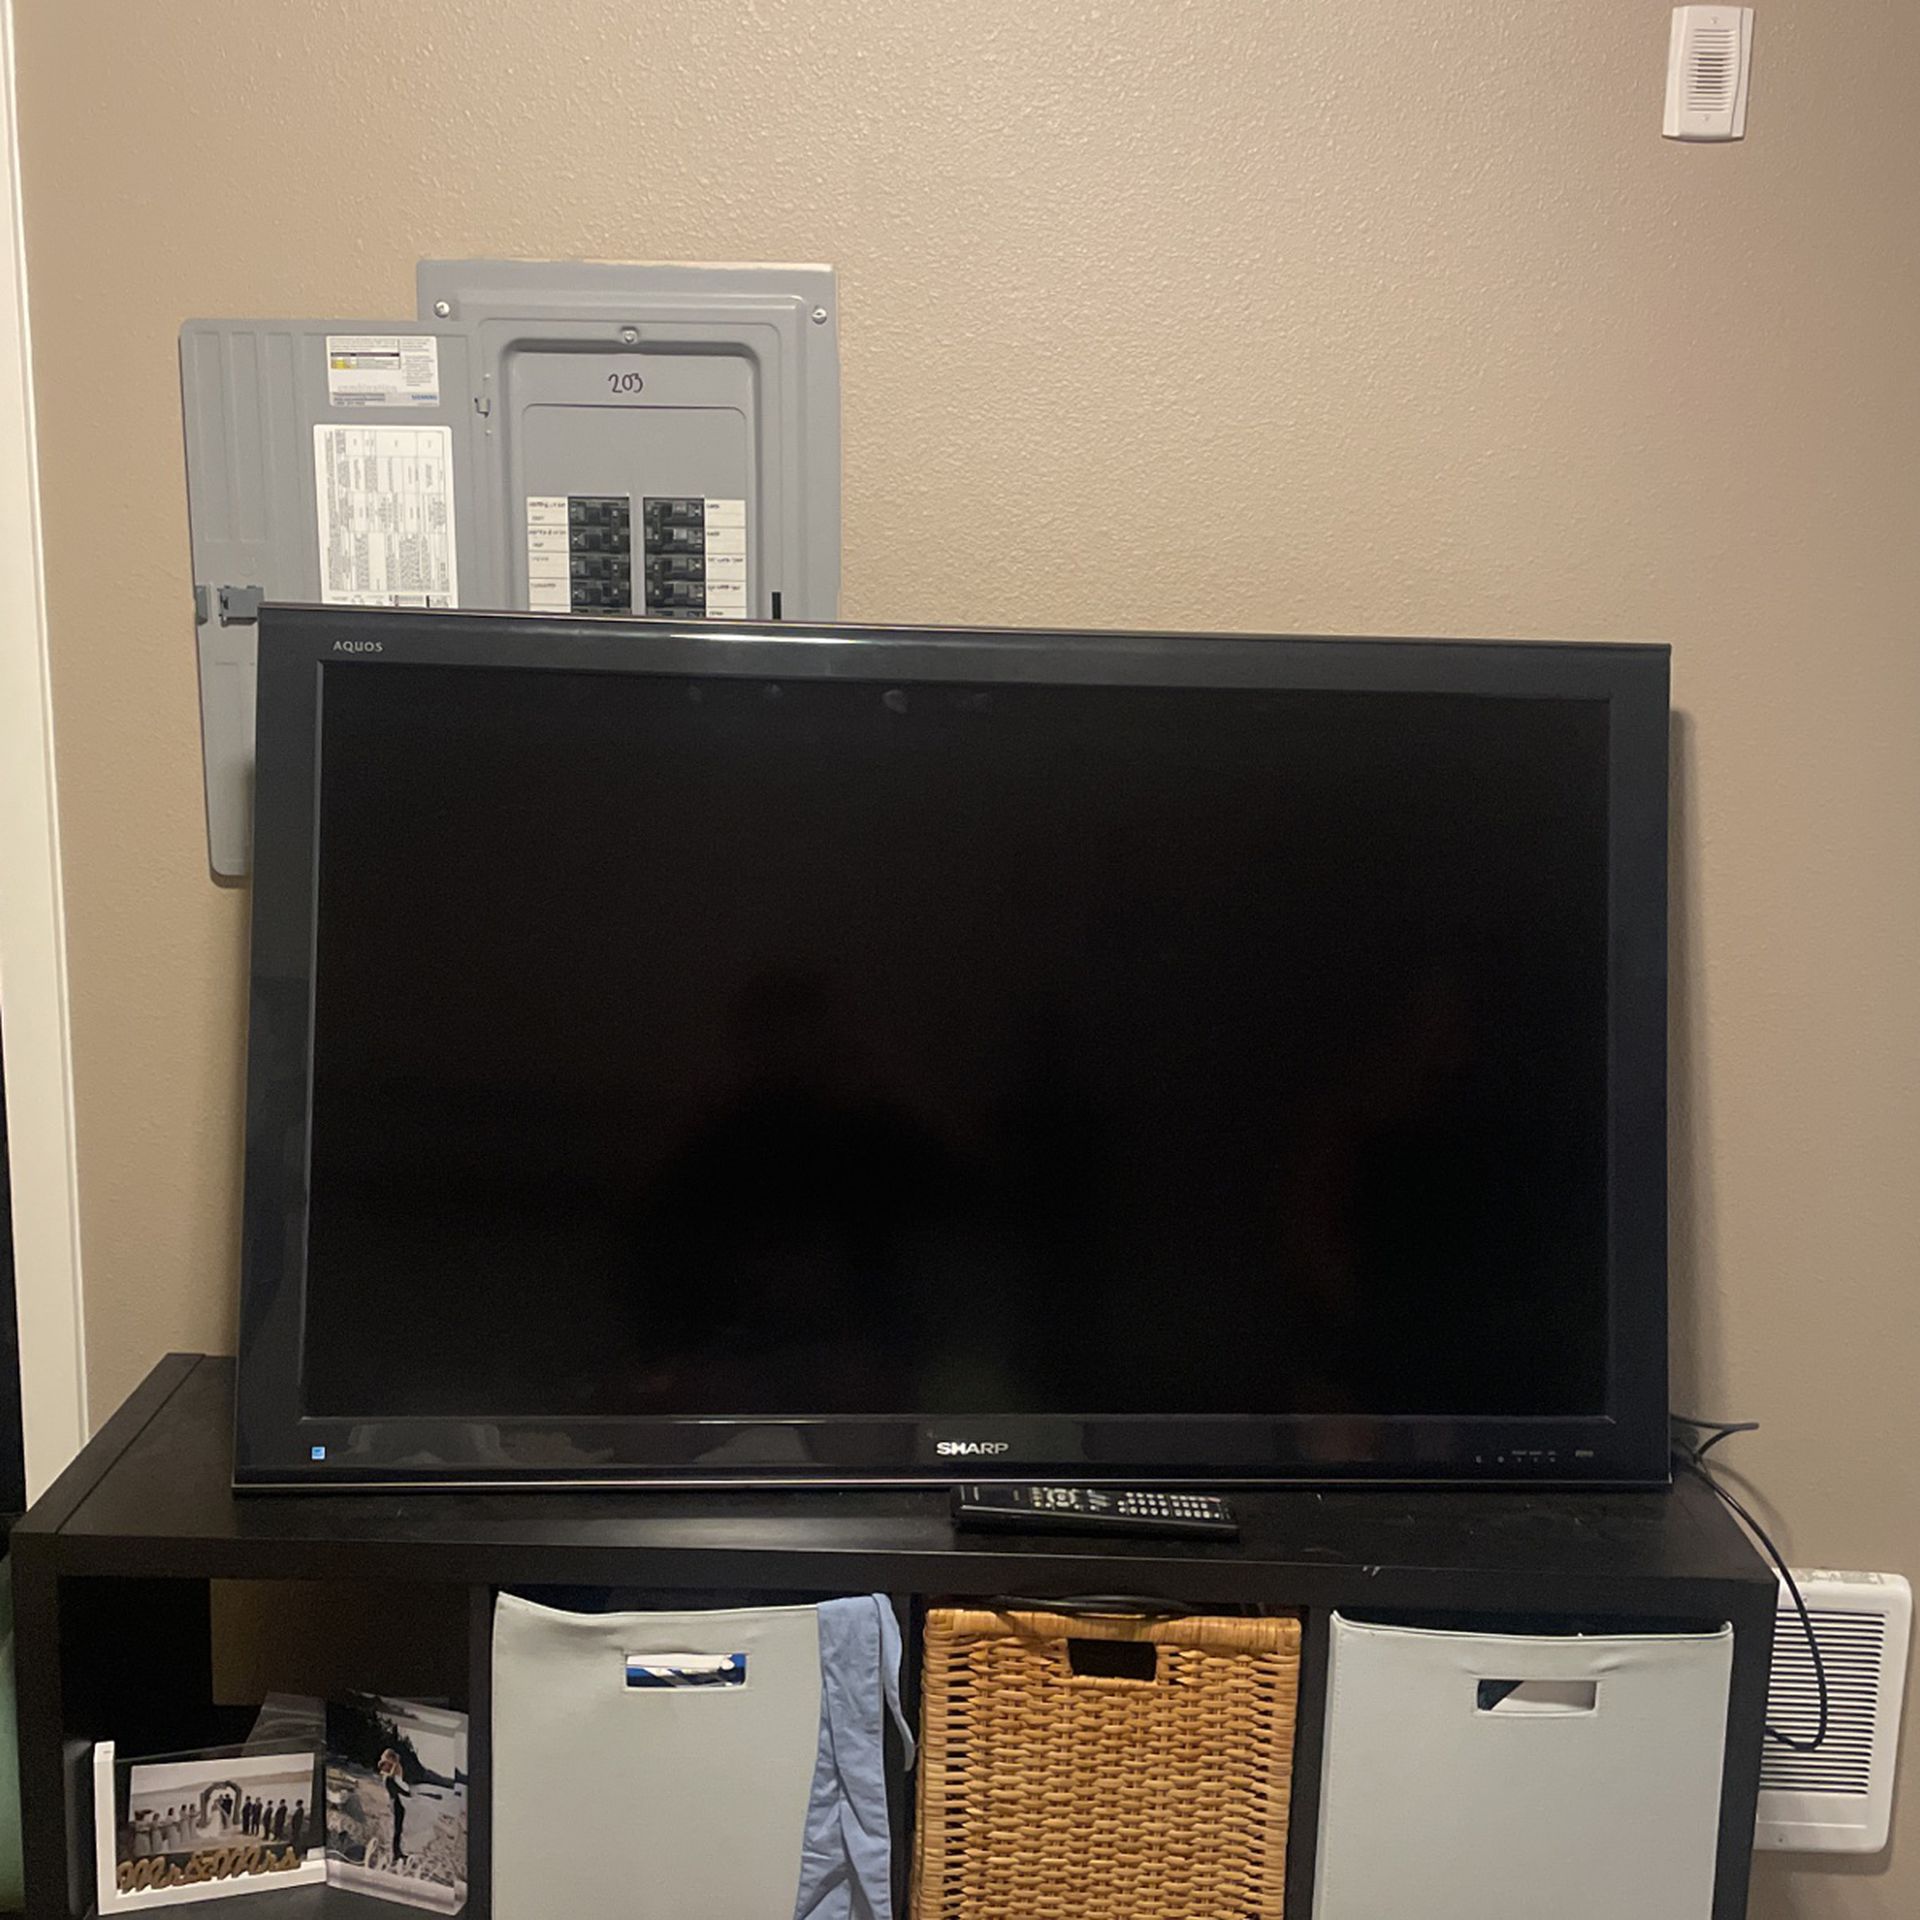 50” Sharp Aquos TV (No Legs) for Sale in Gig Harbor, WA - OfferUp